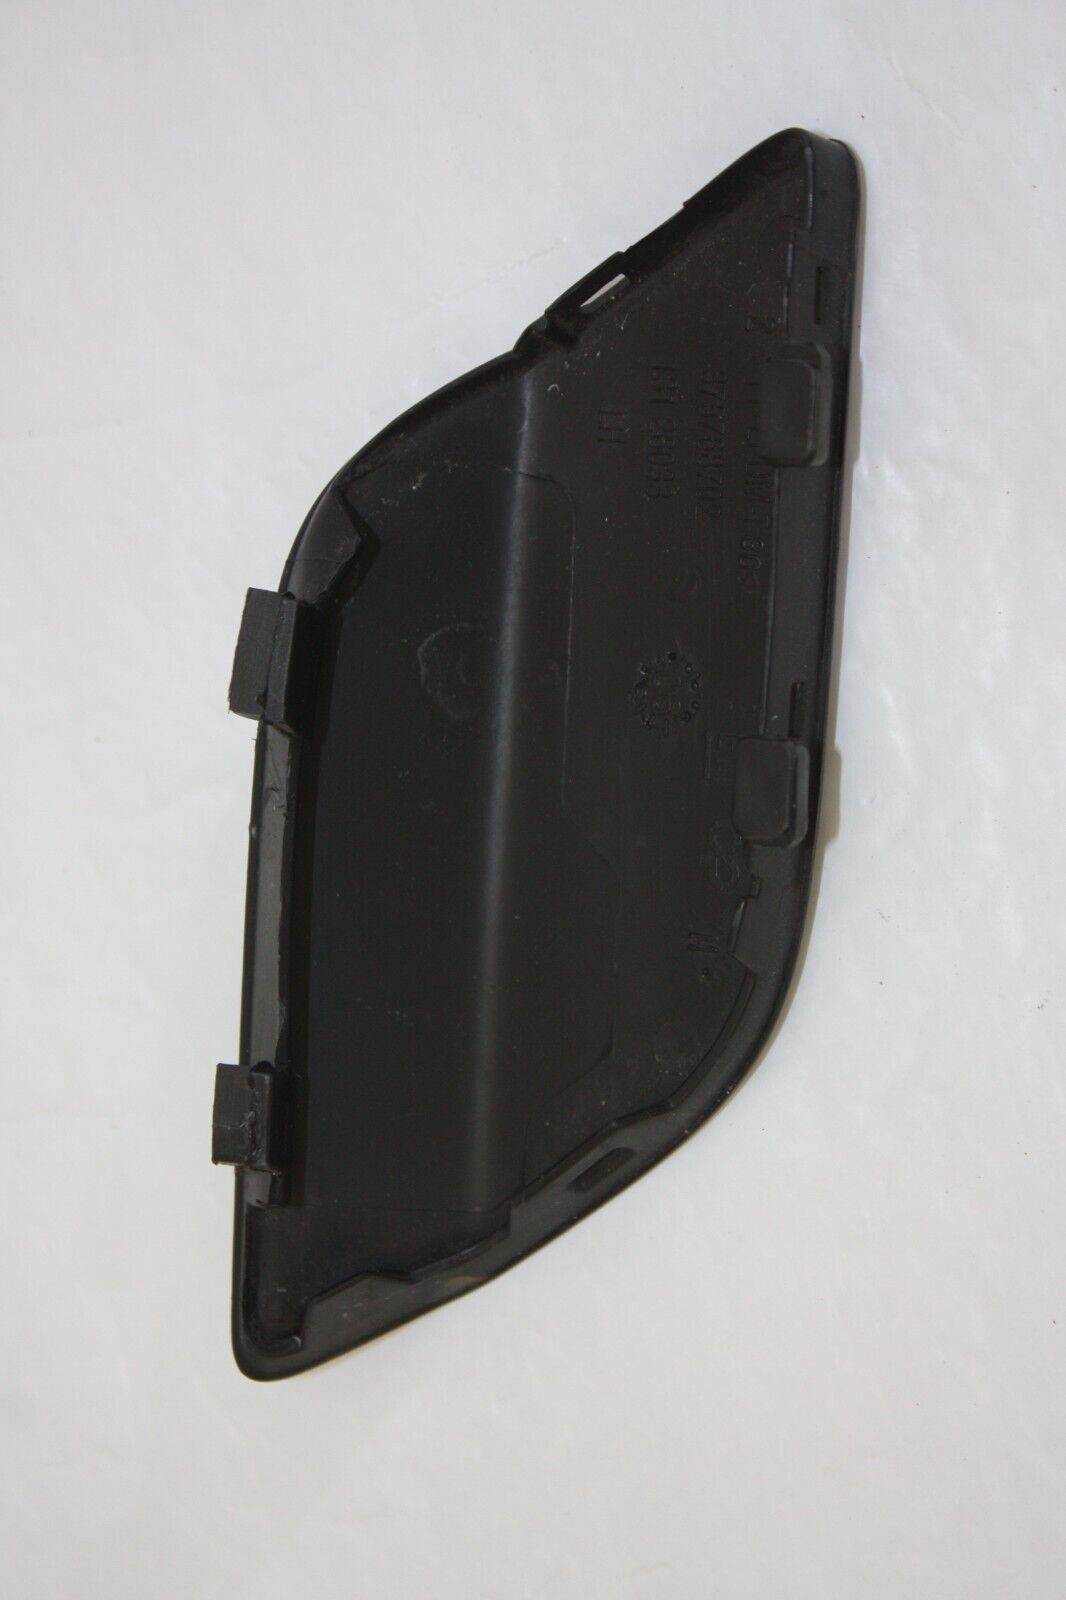 Vauxhall-Astra-H-Front-Bumper-Left-Washer-Cover-2004-to-2009-13126033-Genuine-176245366402-5